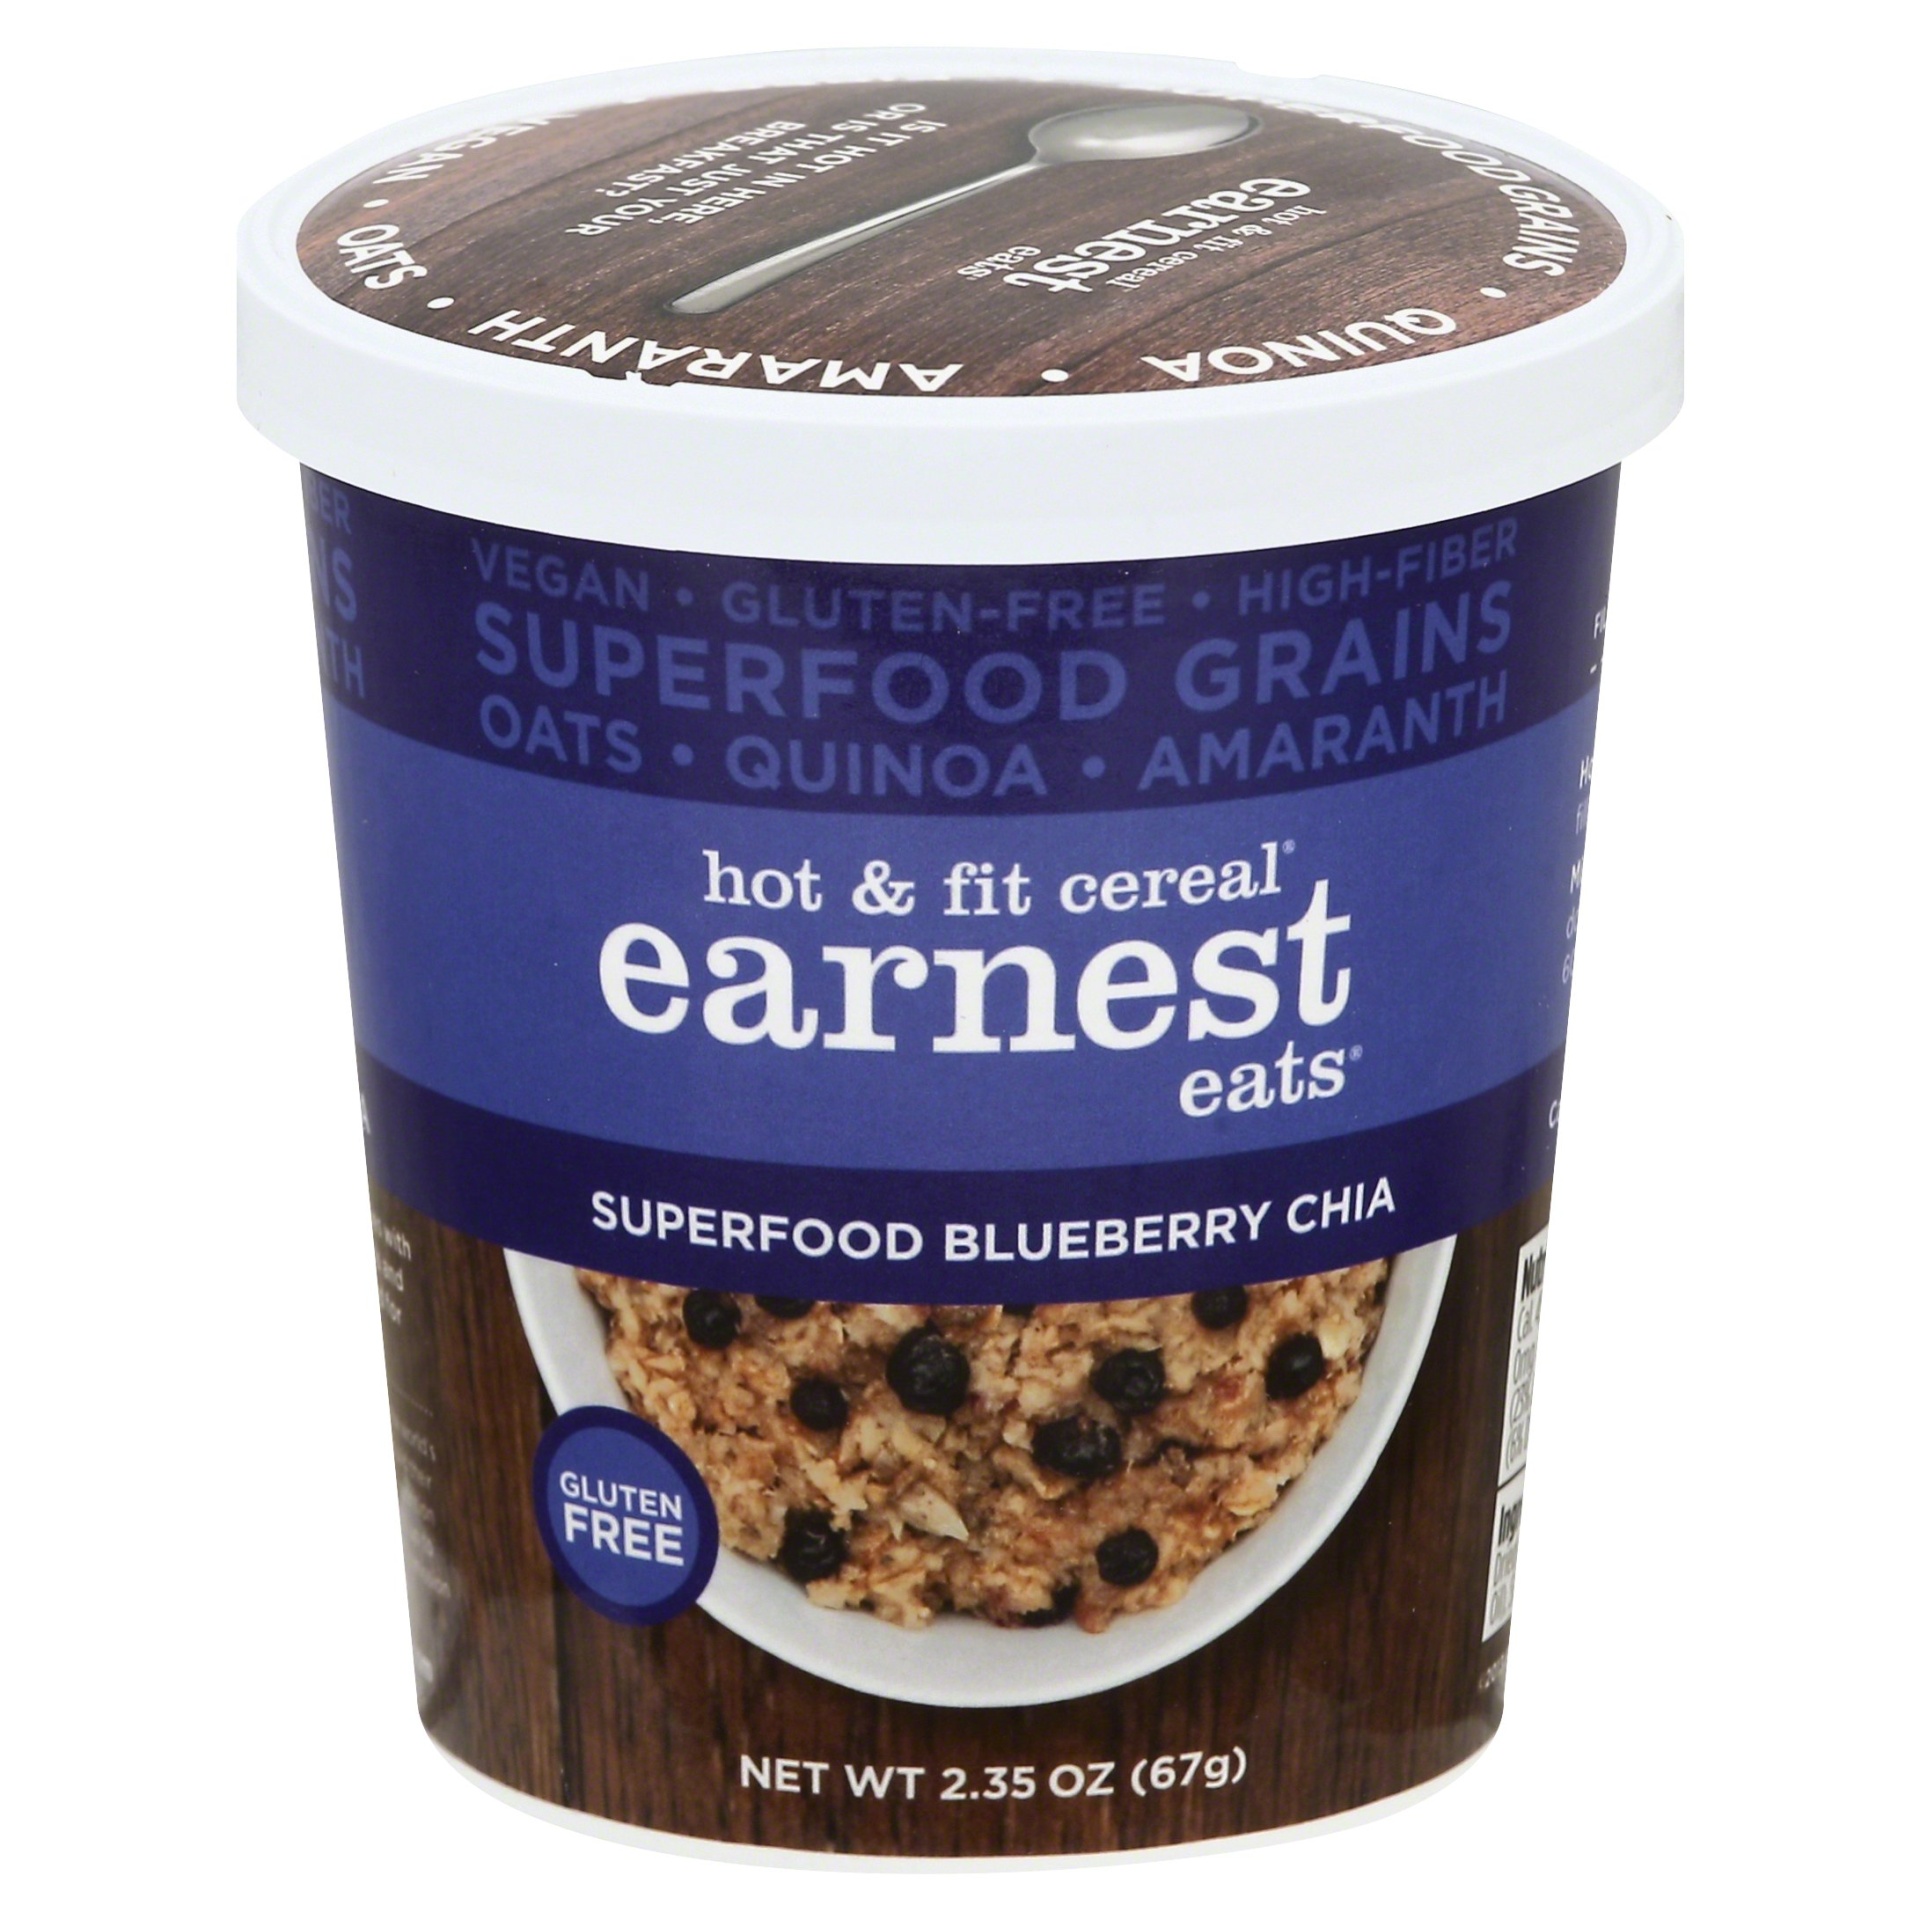 slide 1 of 1, Earnest Eats Hot & Fit Superfood Blueberry Chia Cereal, 2.35 oz